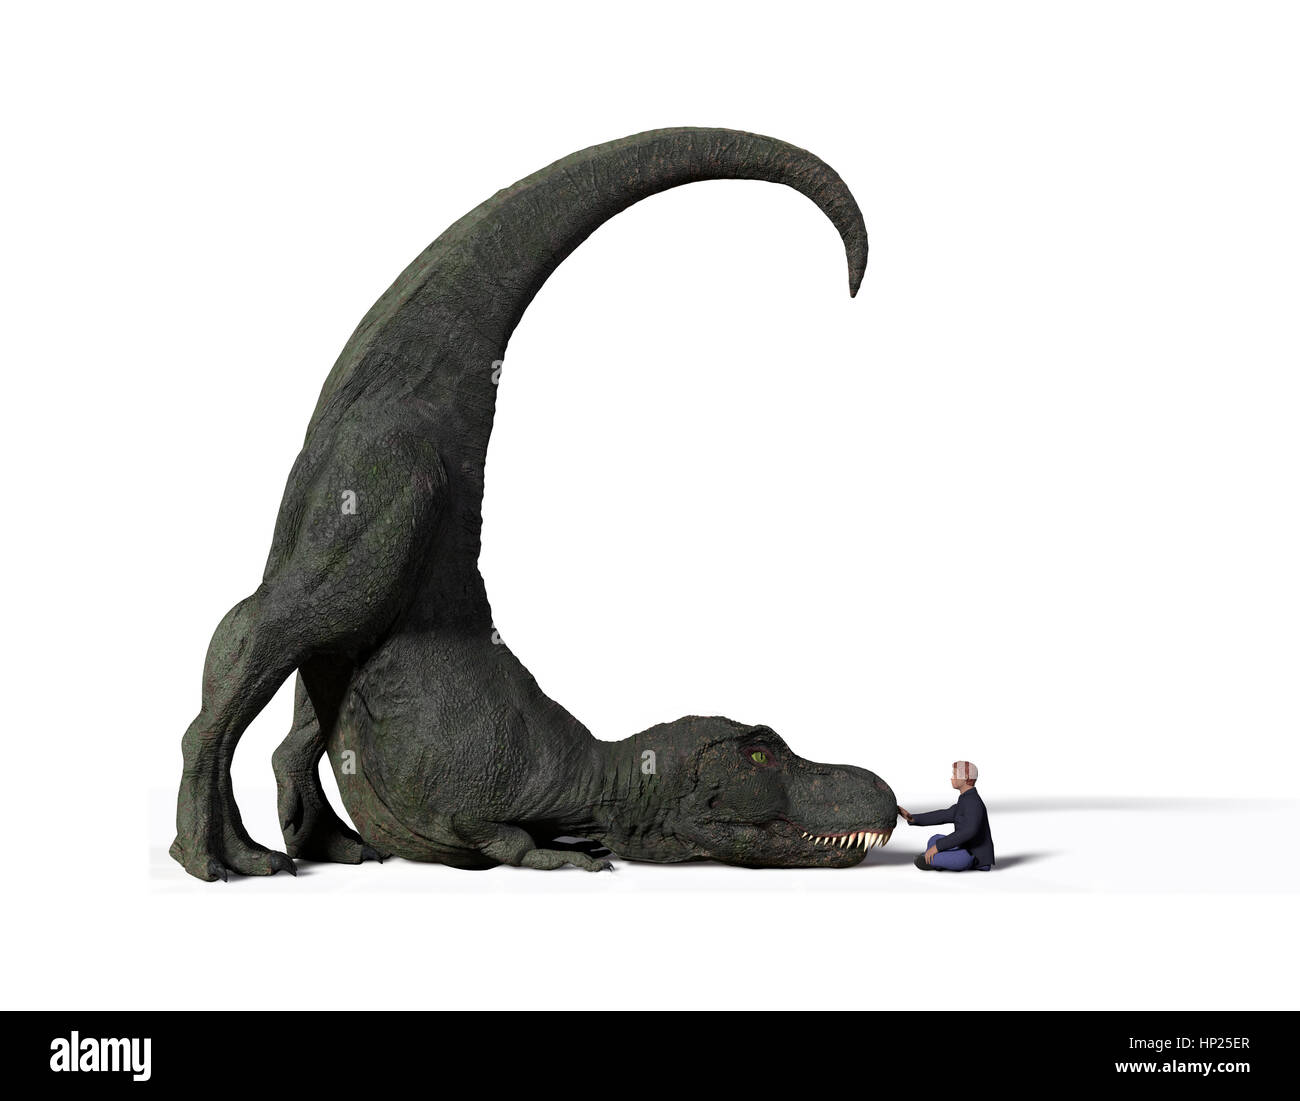 comparison of the size of an adult Tyrannosaurus rex dinosaur from the Jurassic period and a 1.8m human (Homo sapiens), 3d illustration Stock Photo